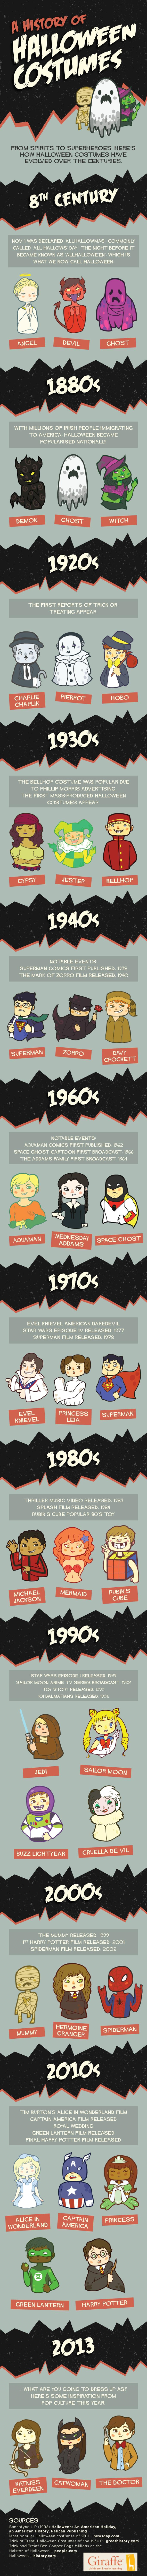 a-history-of-halloween-costumes-infographic1